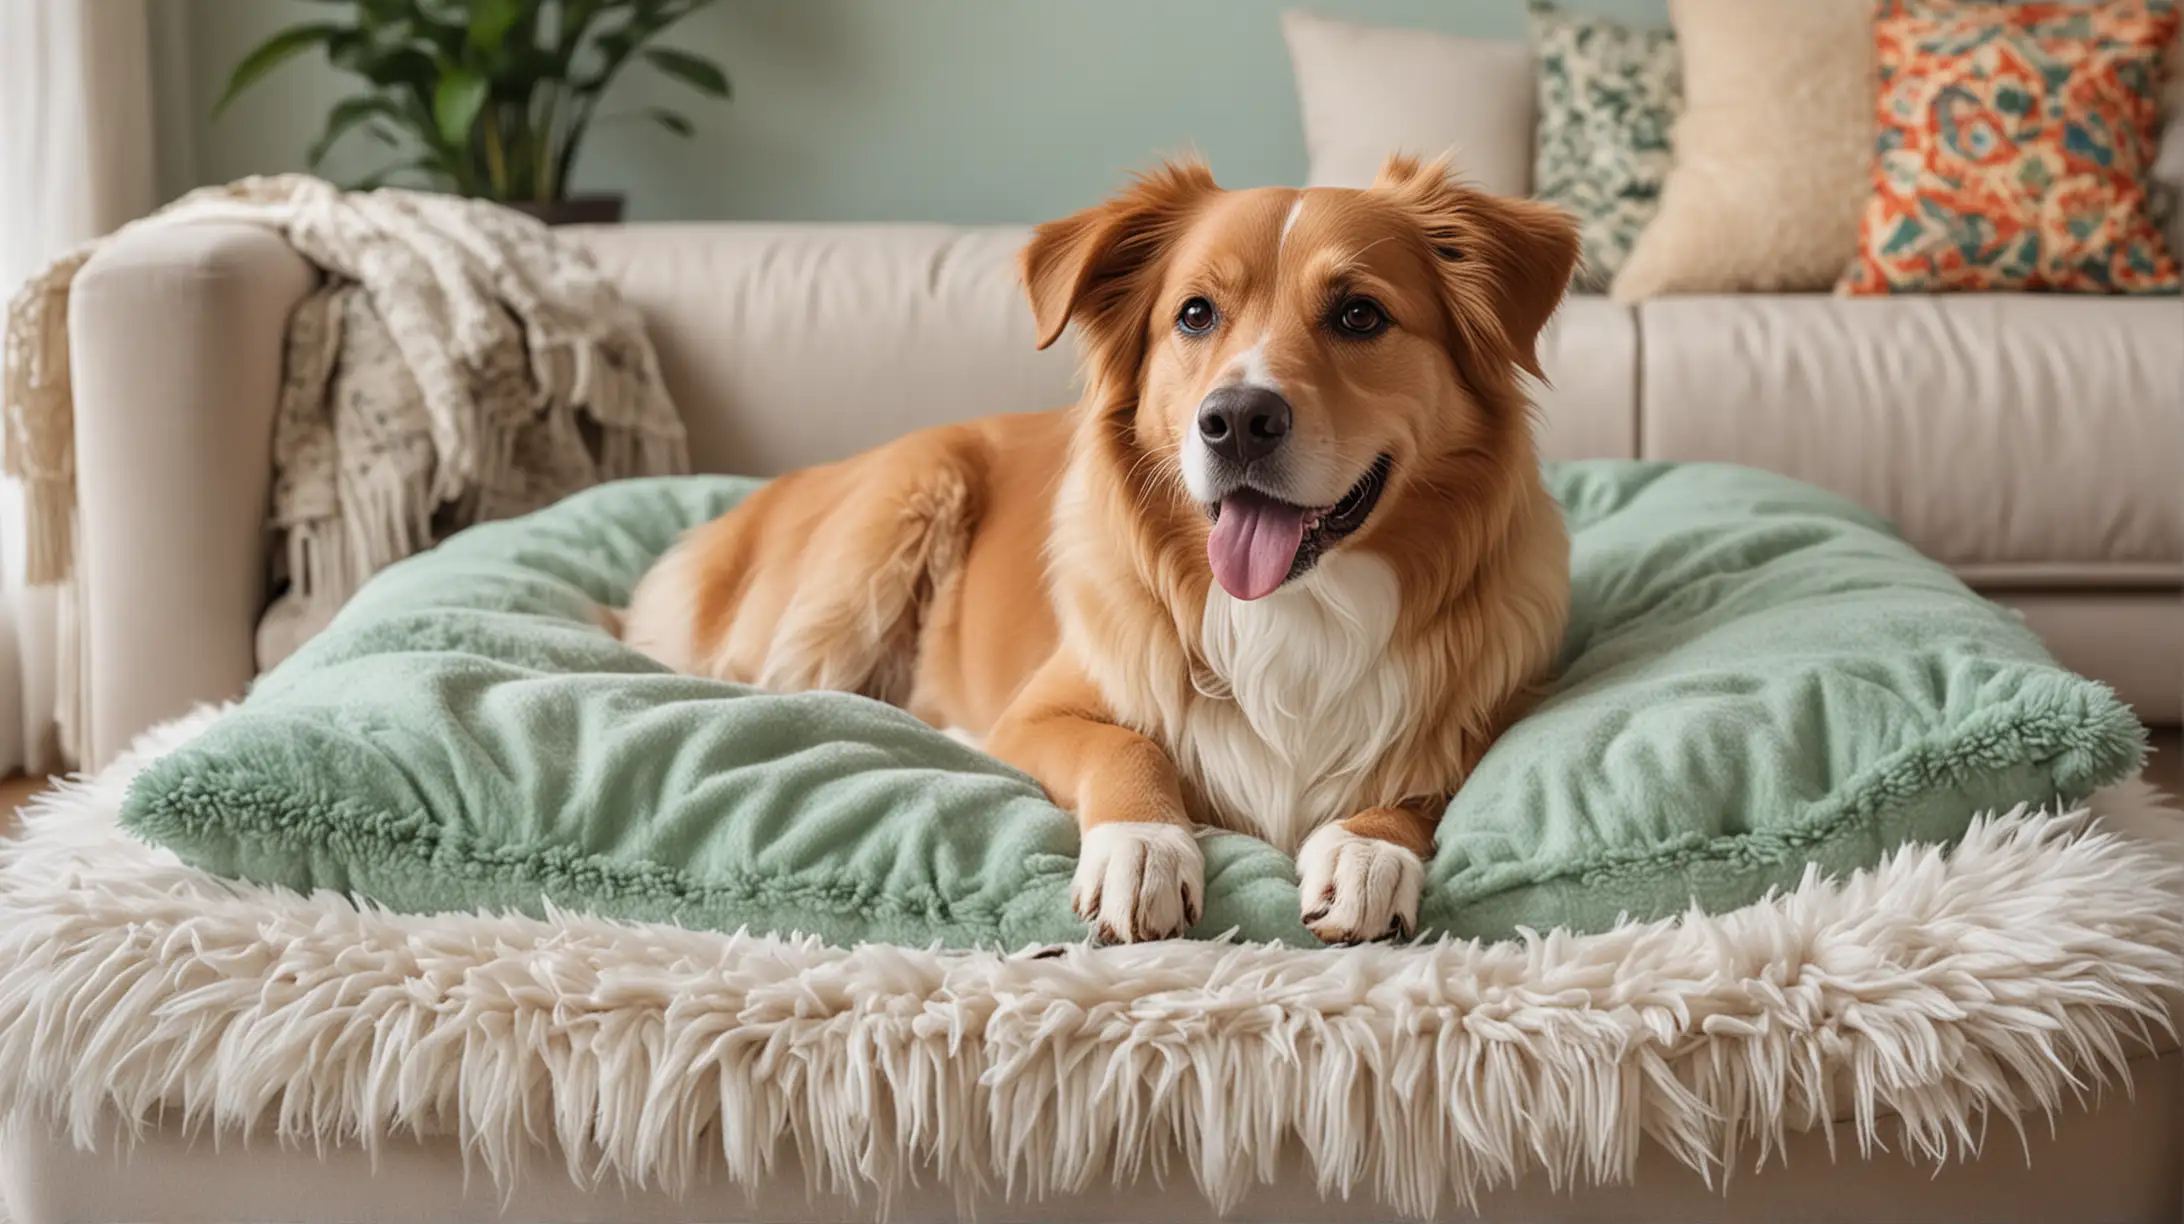 Create an image of a happy dog lying on a cozy dog bed next to a couch in a high-end home setting. The scene should include mint, sky bluish, beiges, whites, grass greens, and a splash of bright colors. The dog should look relaxed and content, with the room appearing inviting and comfortable.